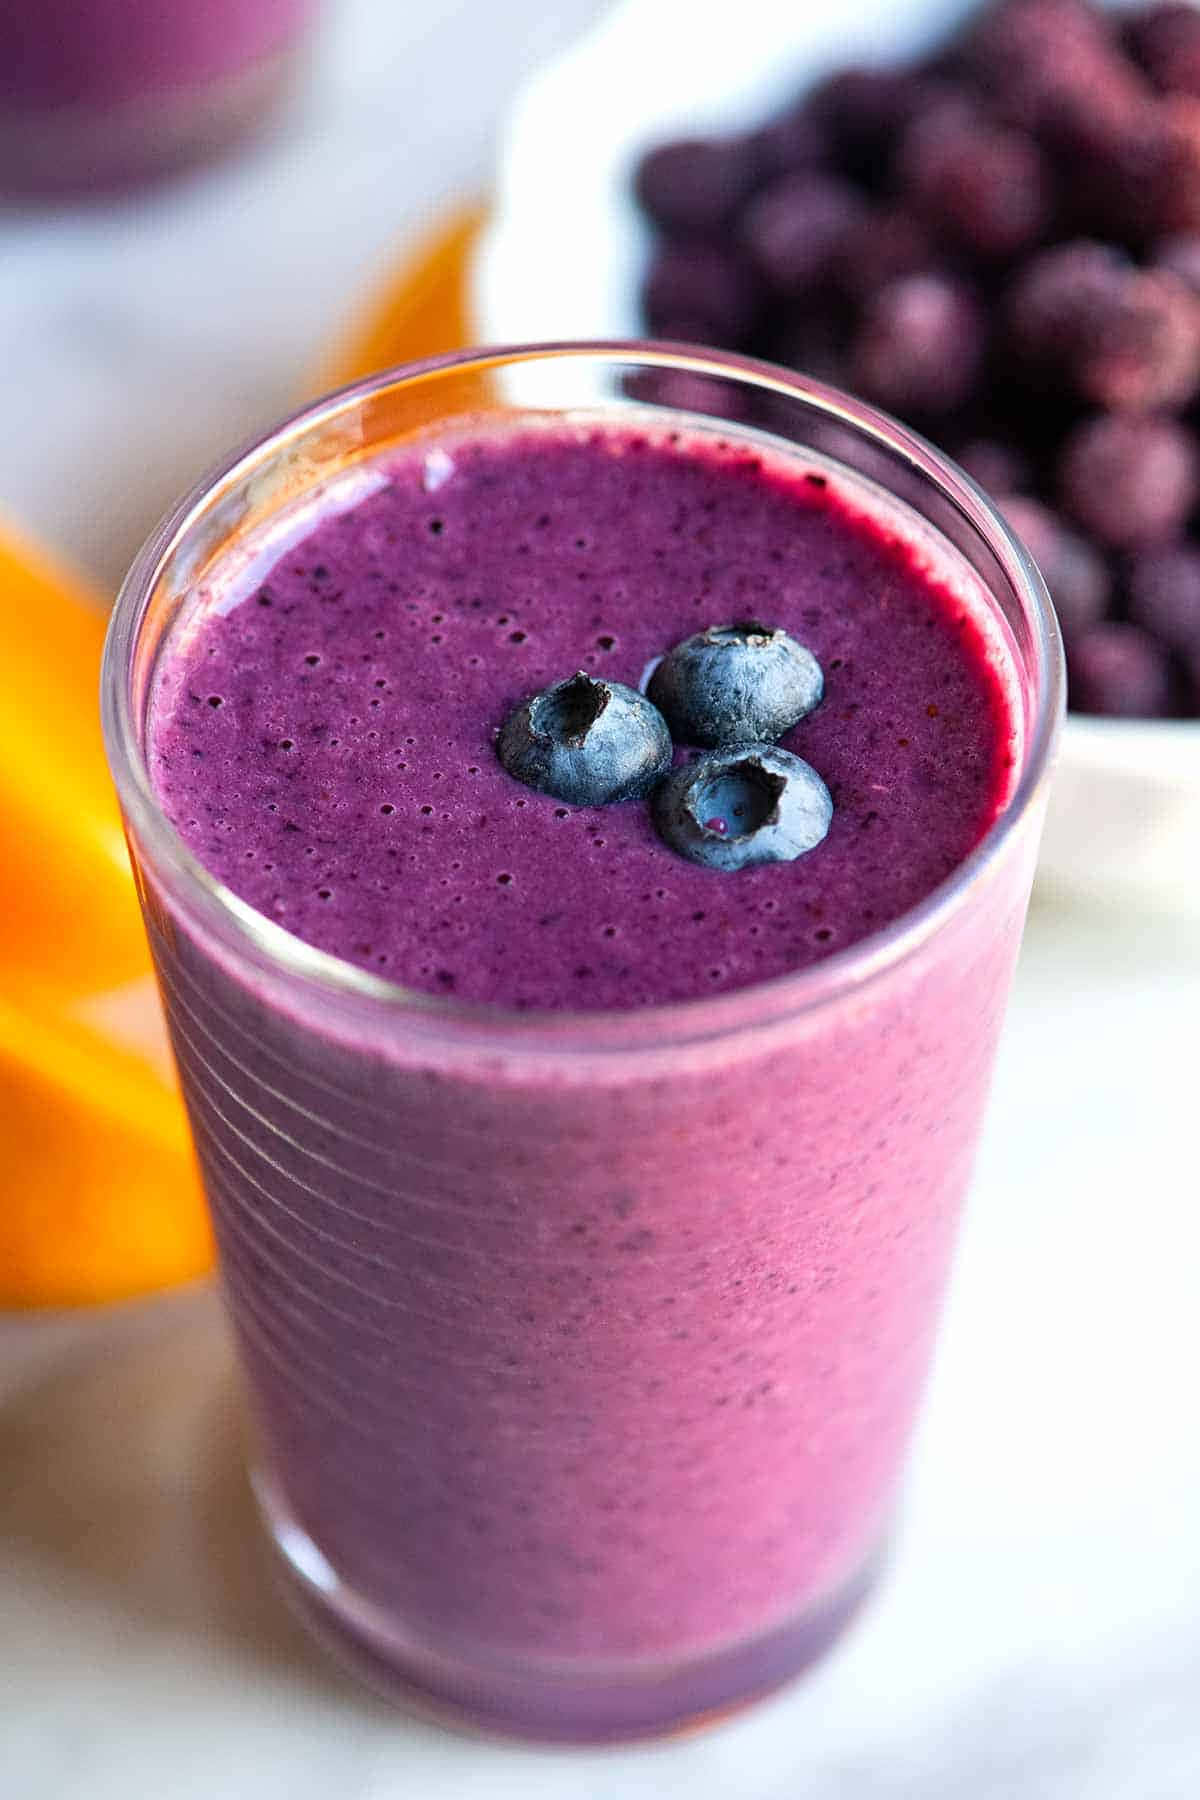 "Refreshing, healthy and delicious - the perfect Blueberry Smoothie!" Wallpaper